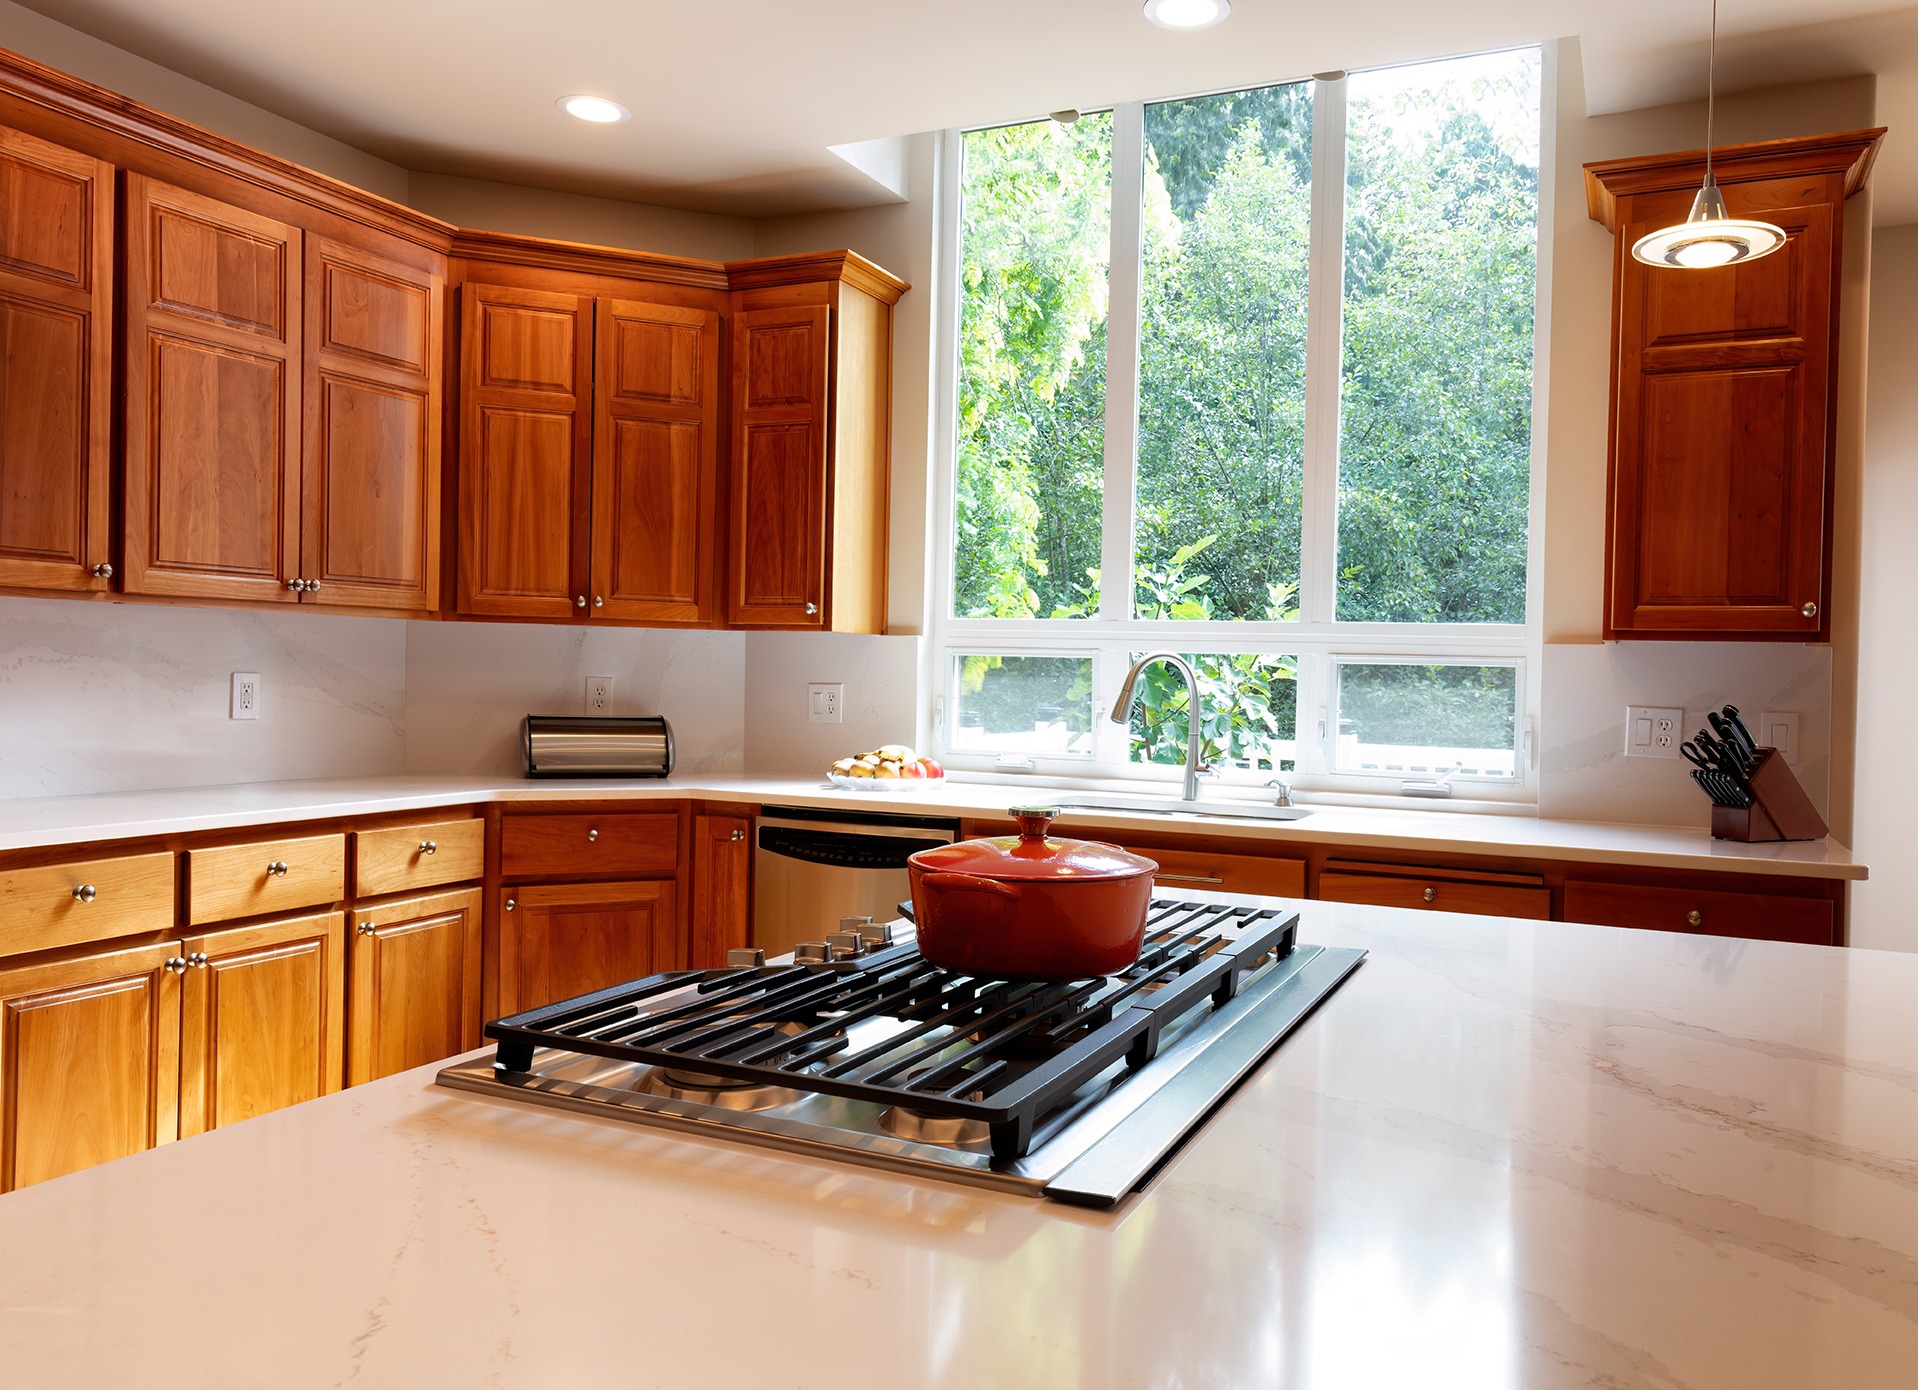 Close up of kitchen stovetop with stone counter top, cherry cabinets and a large window with daylight coming in